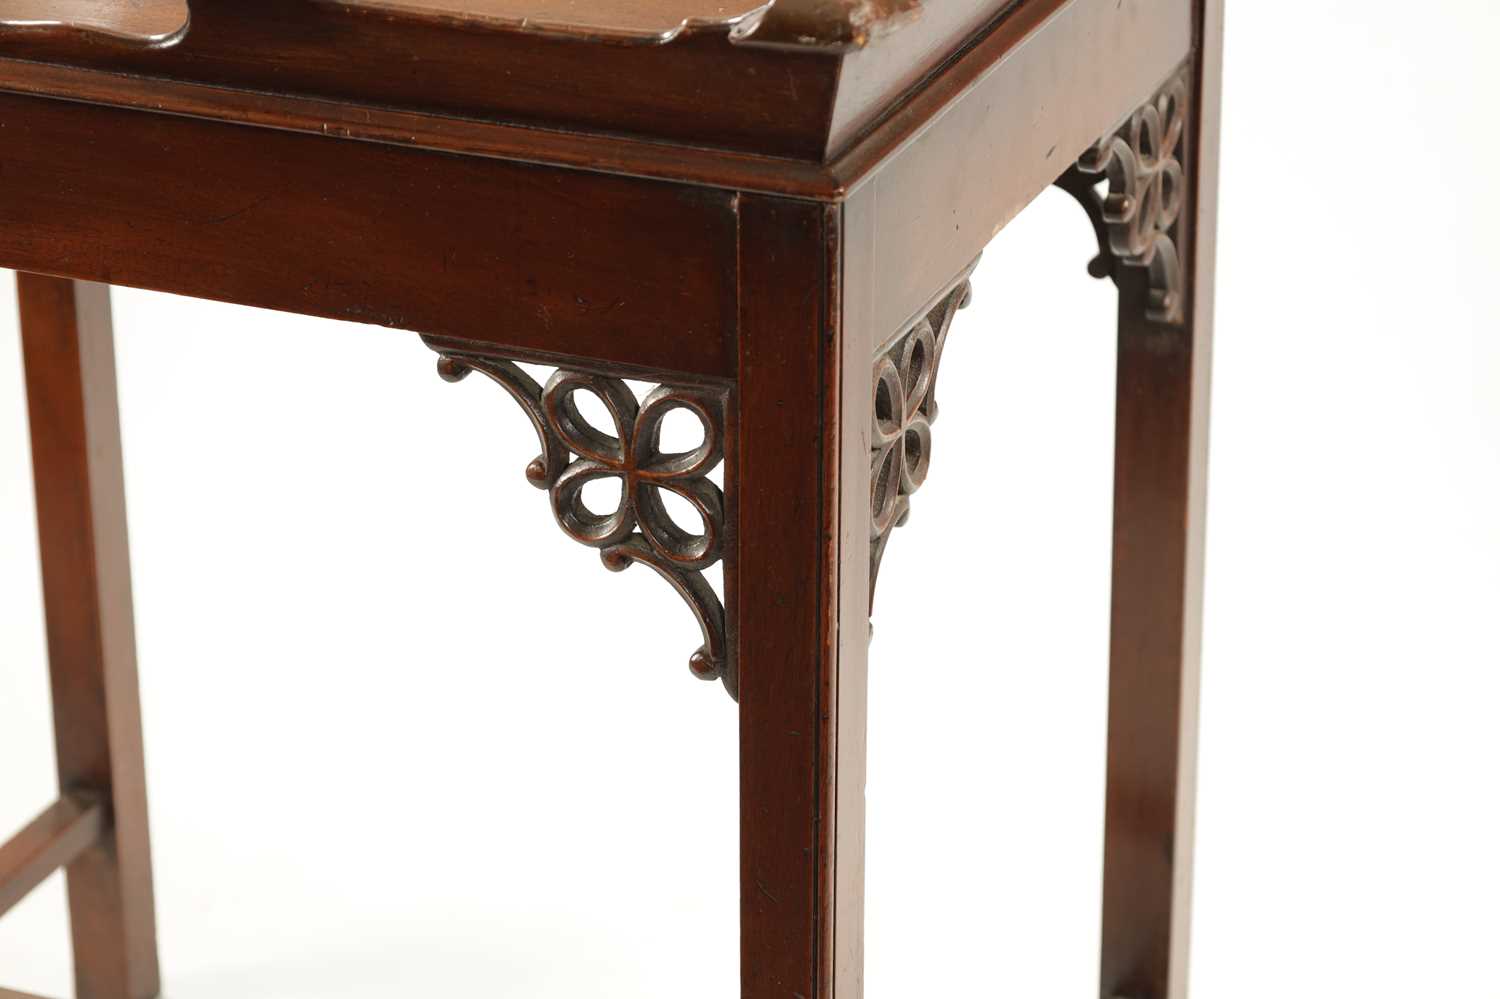 A REPRODUCTION CHIPPENDALE STYLE MAHOGANY TRAY ON STAND - Image 3 of 6